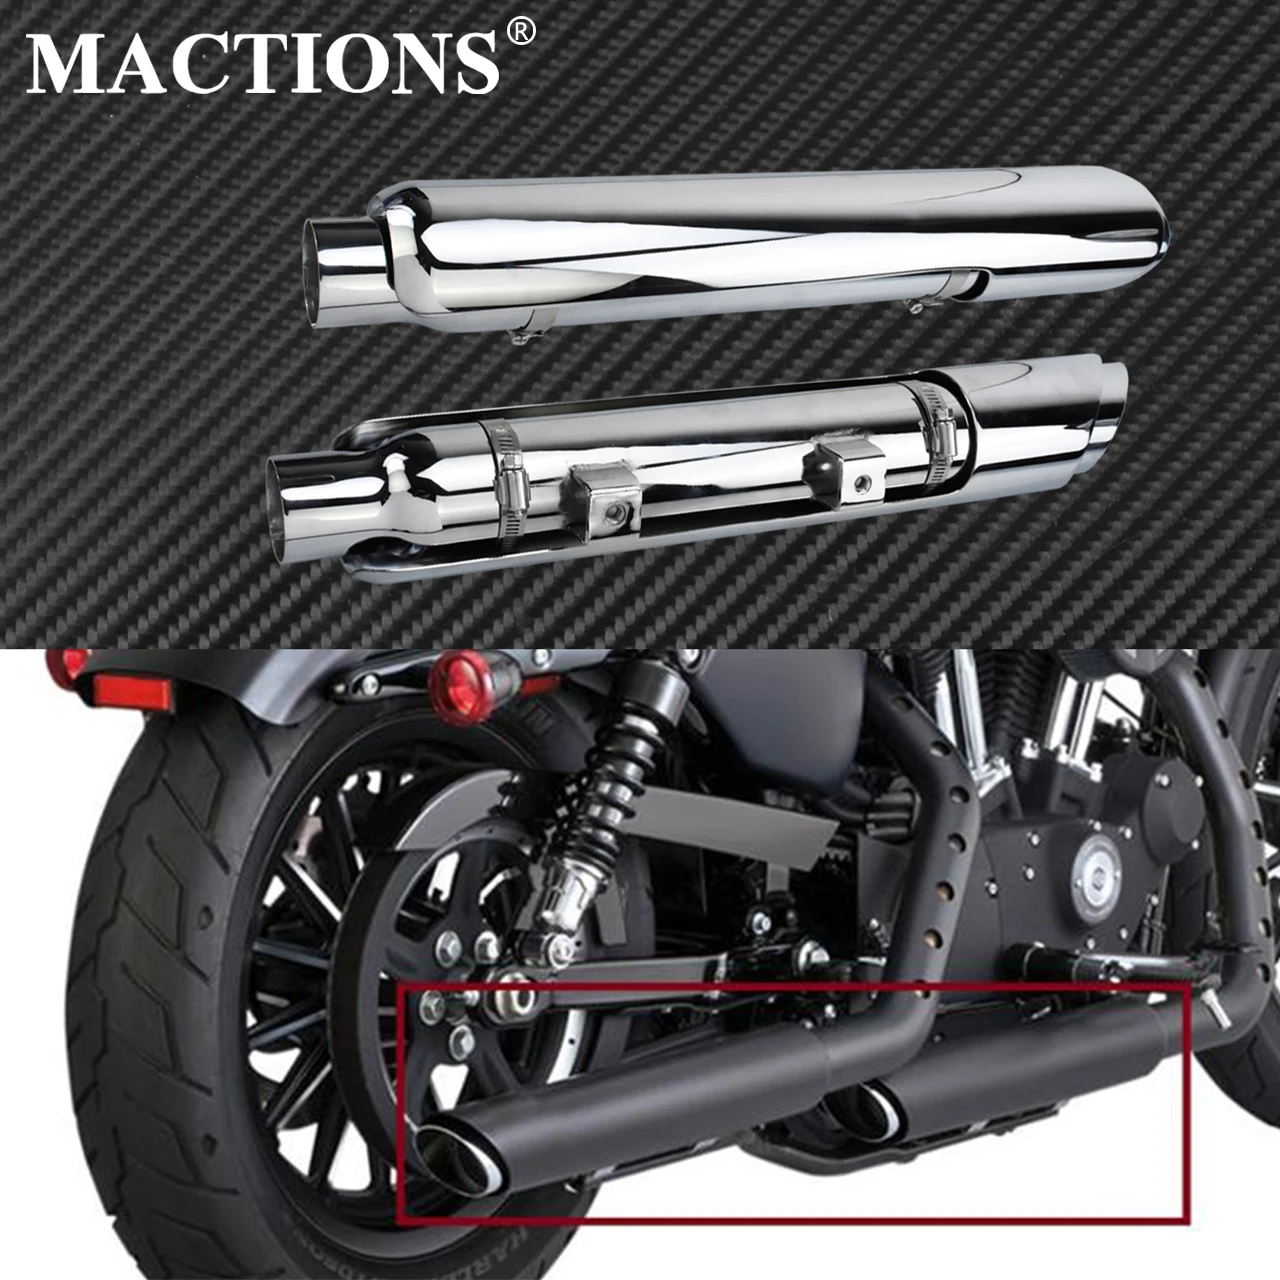 

Motorcycle Chrome Slip-On Mufflers Exhaust Pipes W/ Heat Shield For Harley Sportster 883 1200 XL 72 48 Iron Models 2014-19 2020